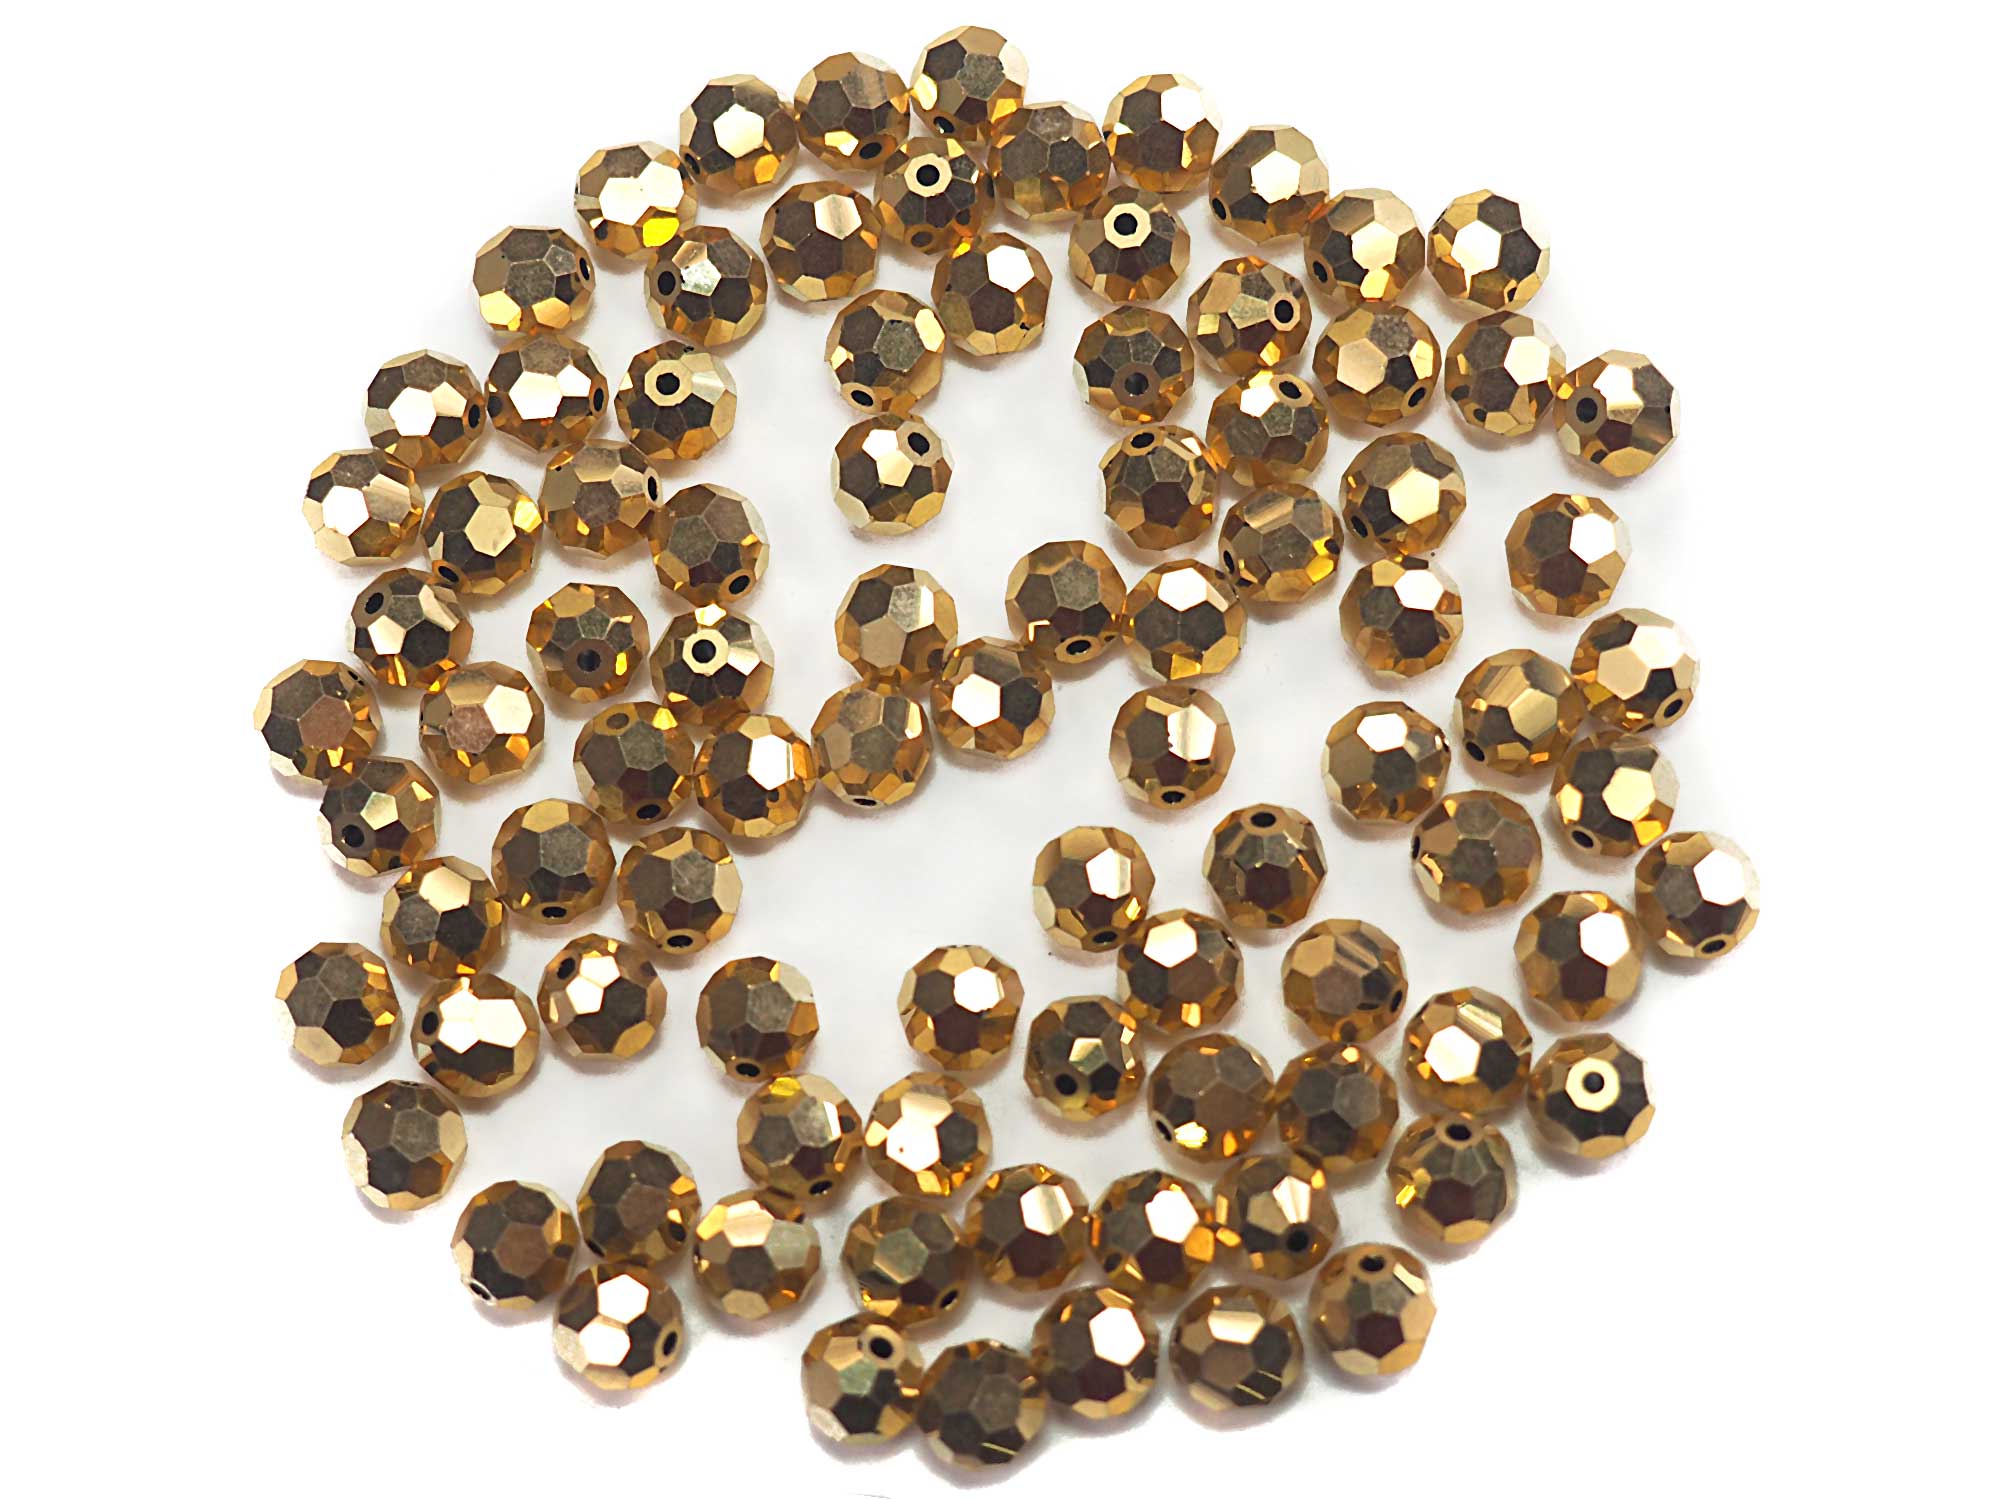 Crystal Aurum Fully Gold coated, Czech Machine Cut Round Crystal Beads, 5mm, 8mm